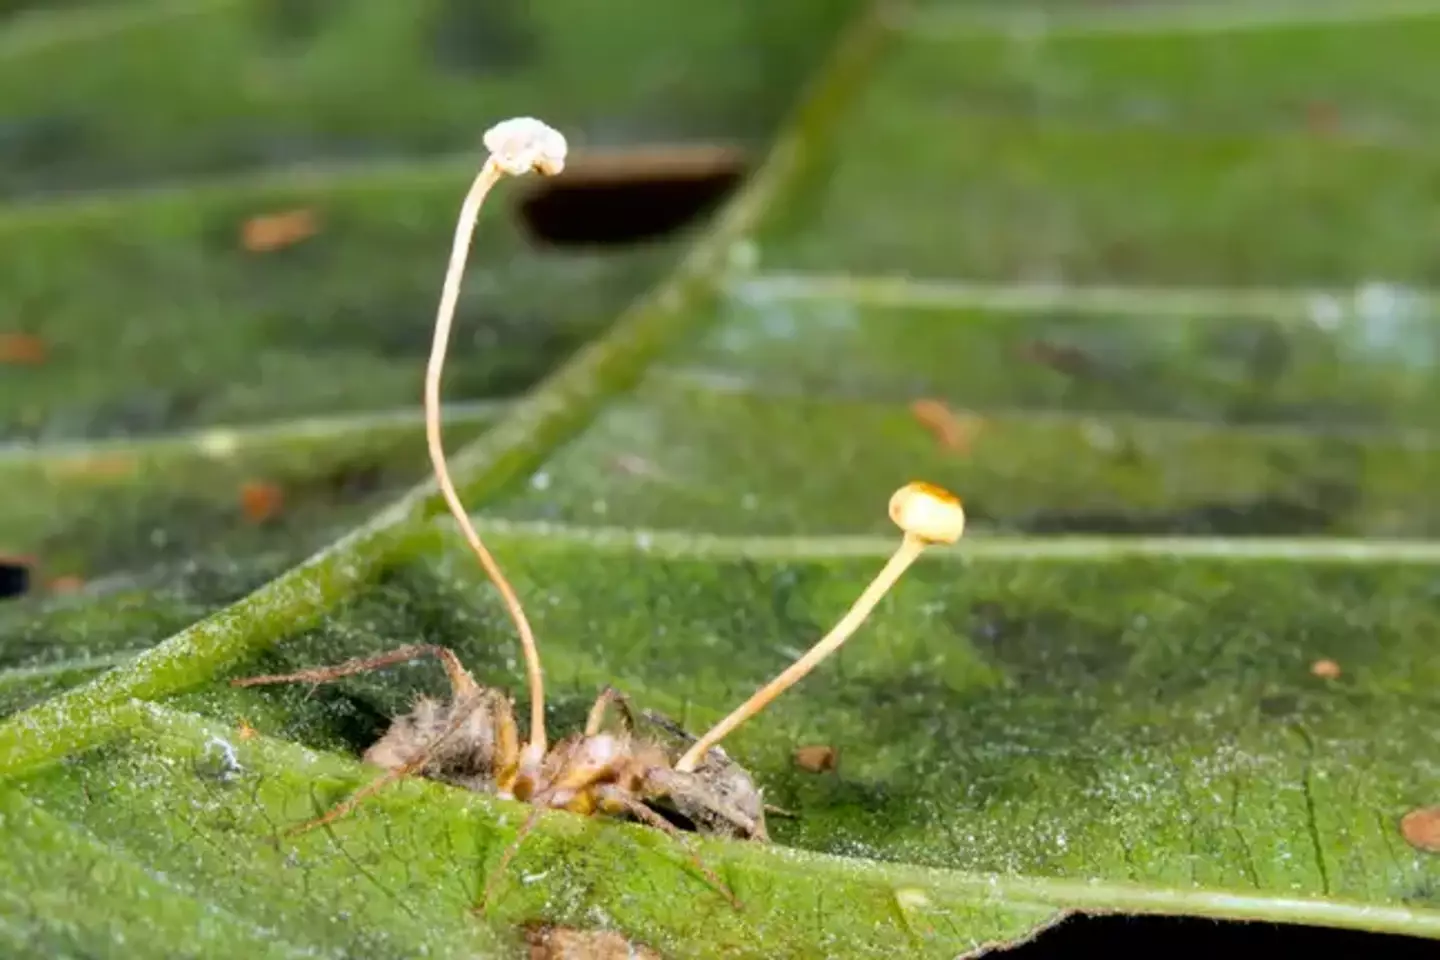 Here's what cordyceps does to an ant.